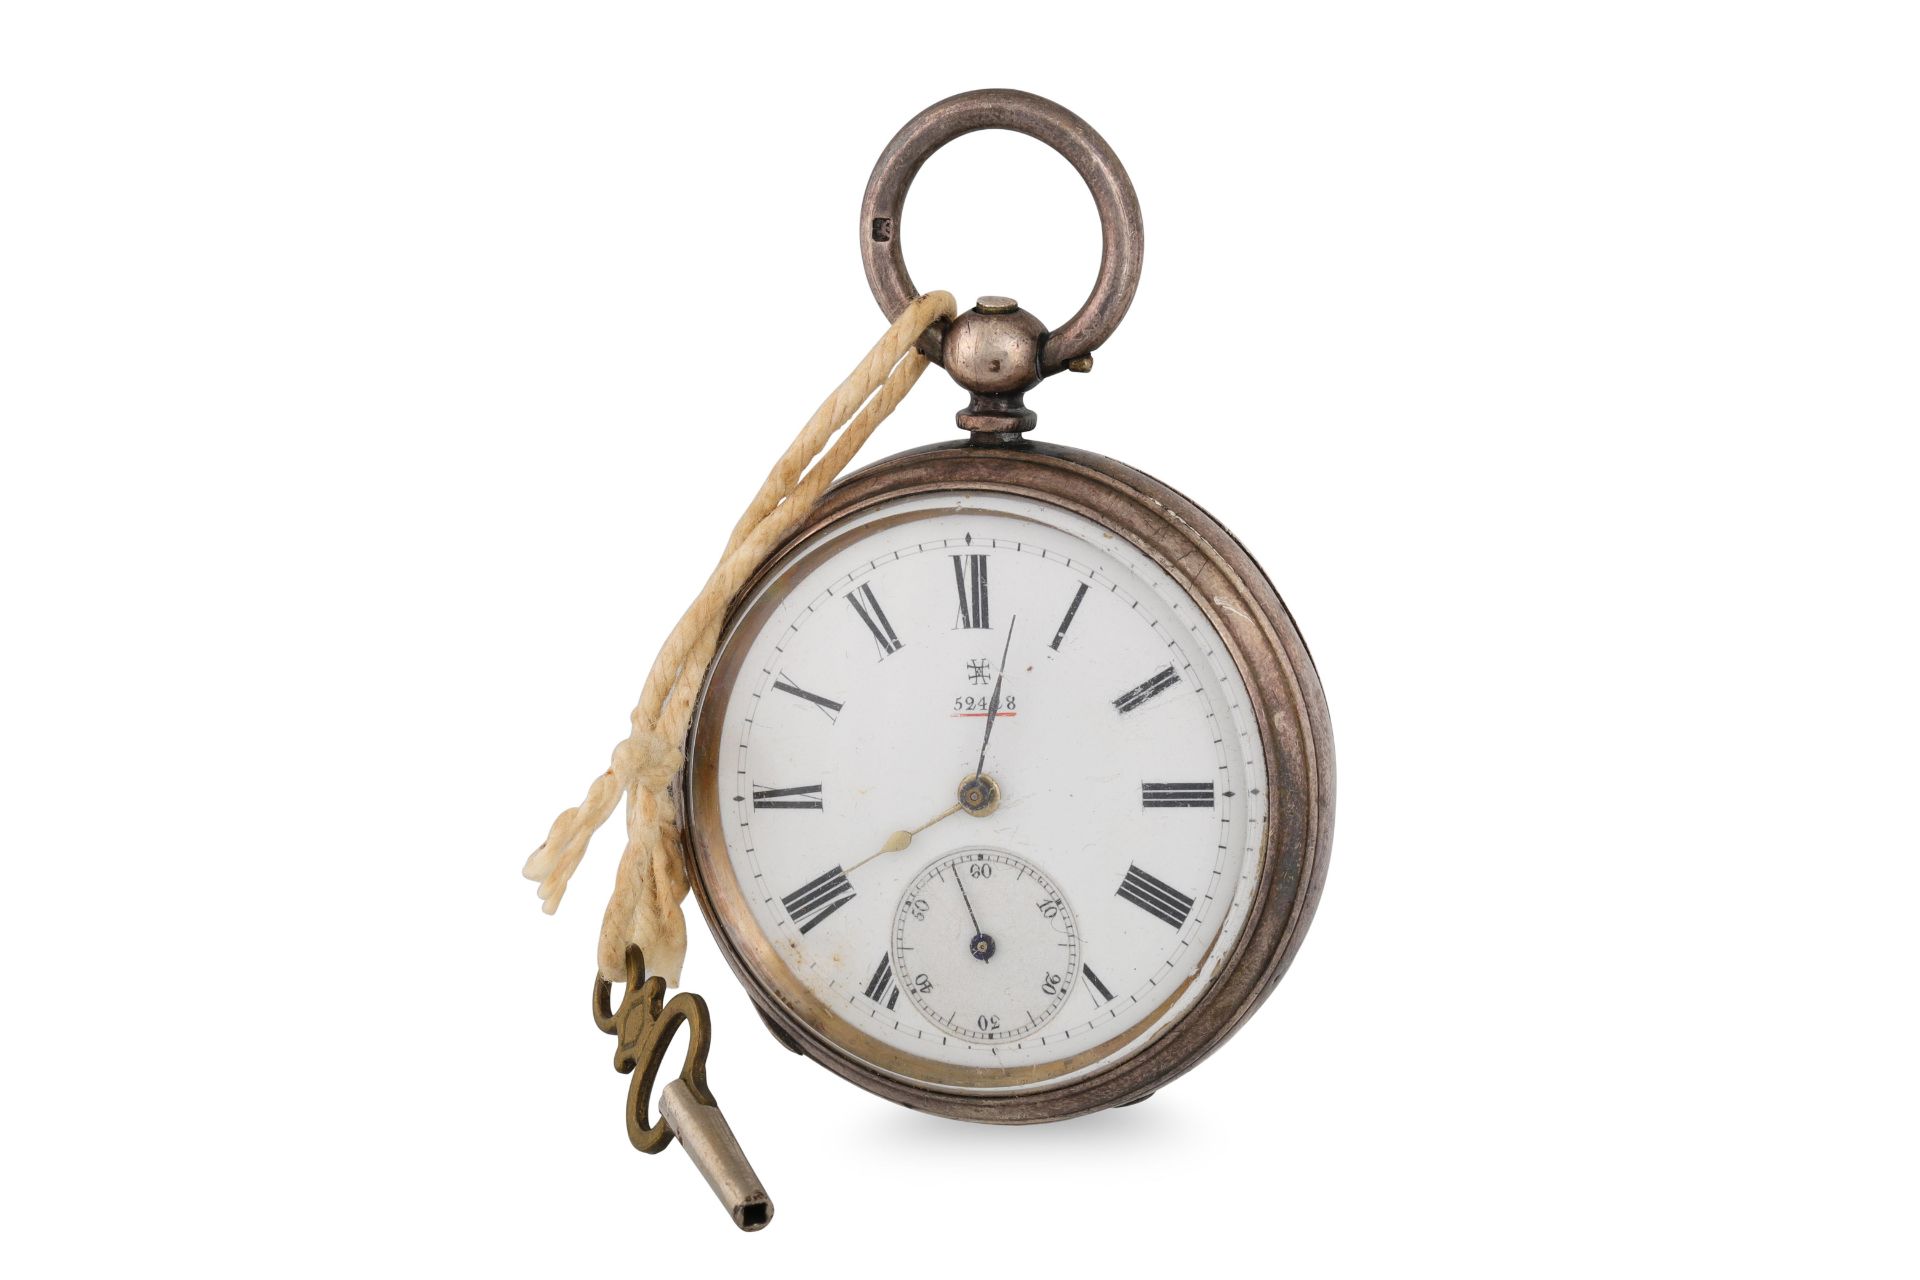 A VICTORIAN SILVER CASED OPEN FACED POCKET WATCH, white enamel dial with Roman numerals, seperate